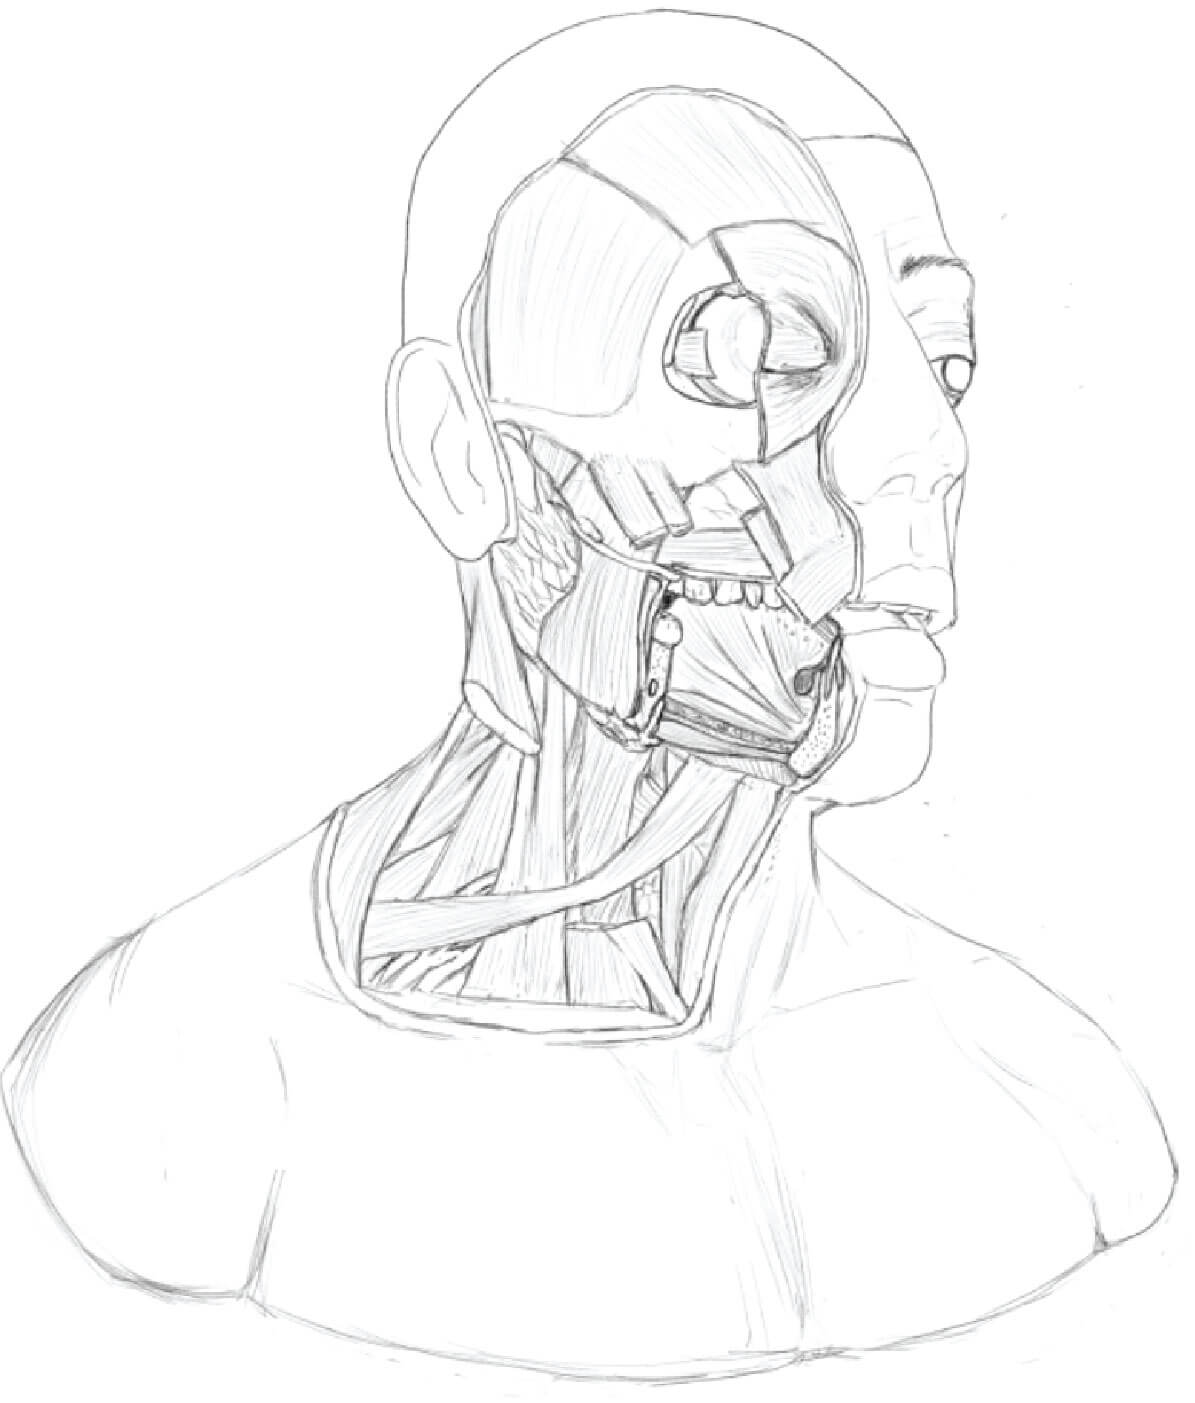 Initial lineart of full head and shoulders